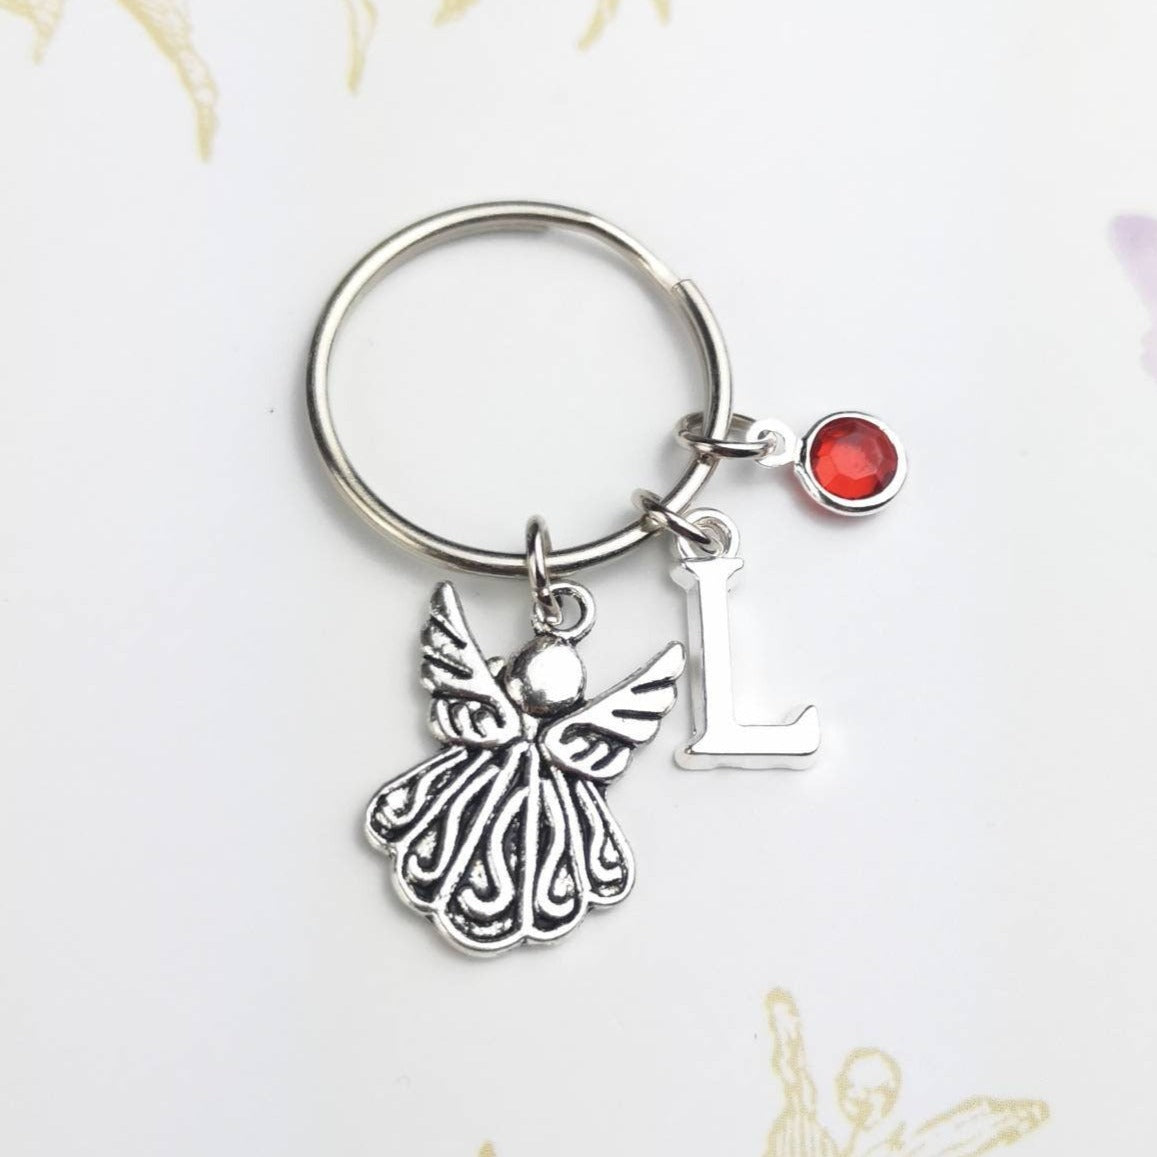 Personalised guardian angel keyring with initial and birthstone